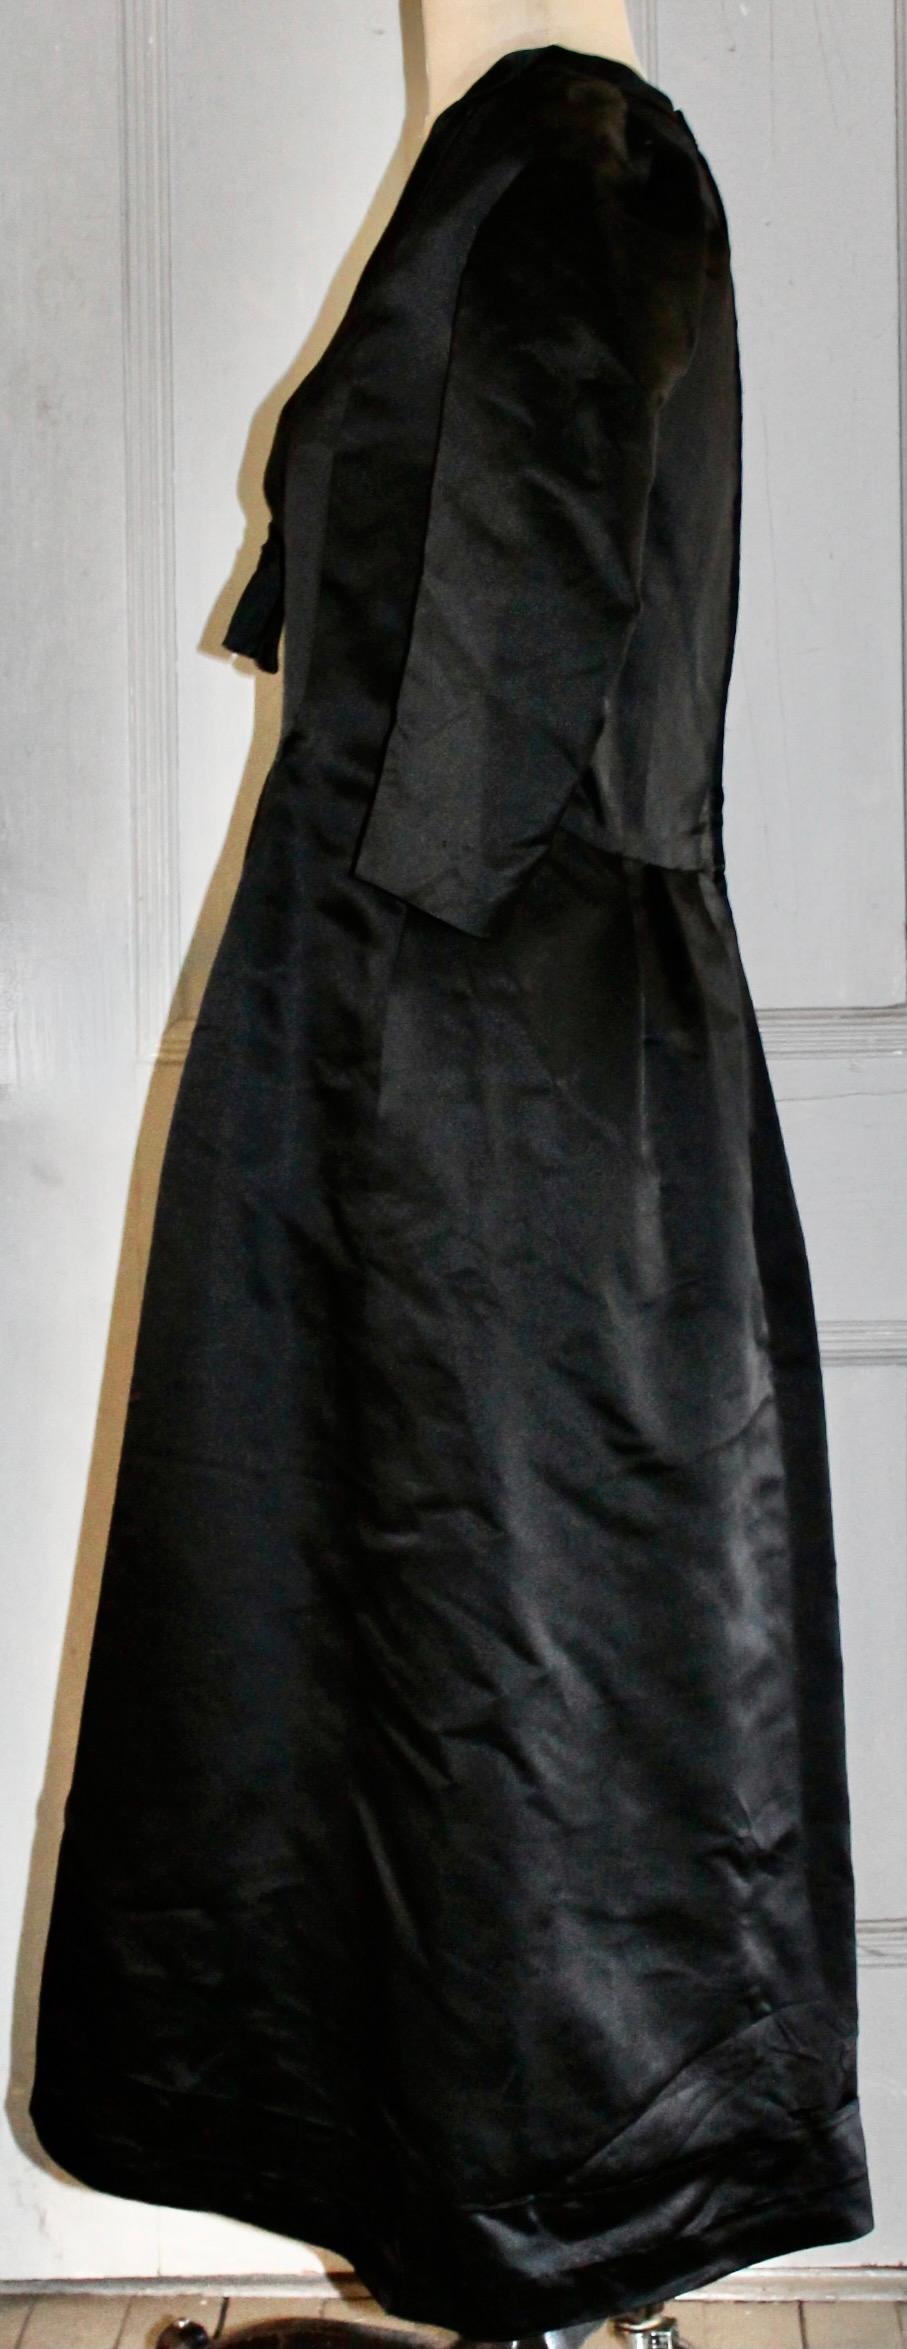 Christian Dior Original Early Black Satan/Silk Evening Dress In Good Condition For Sale In Sharon, CT